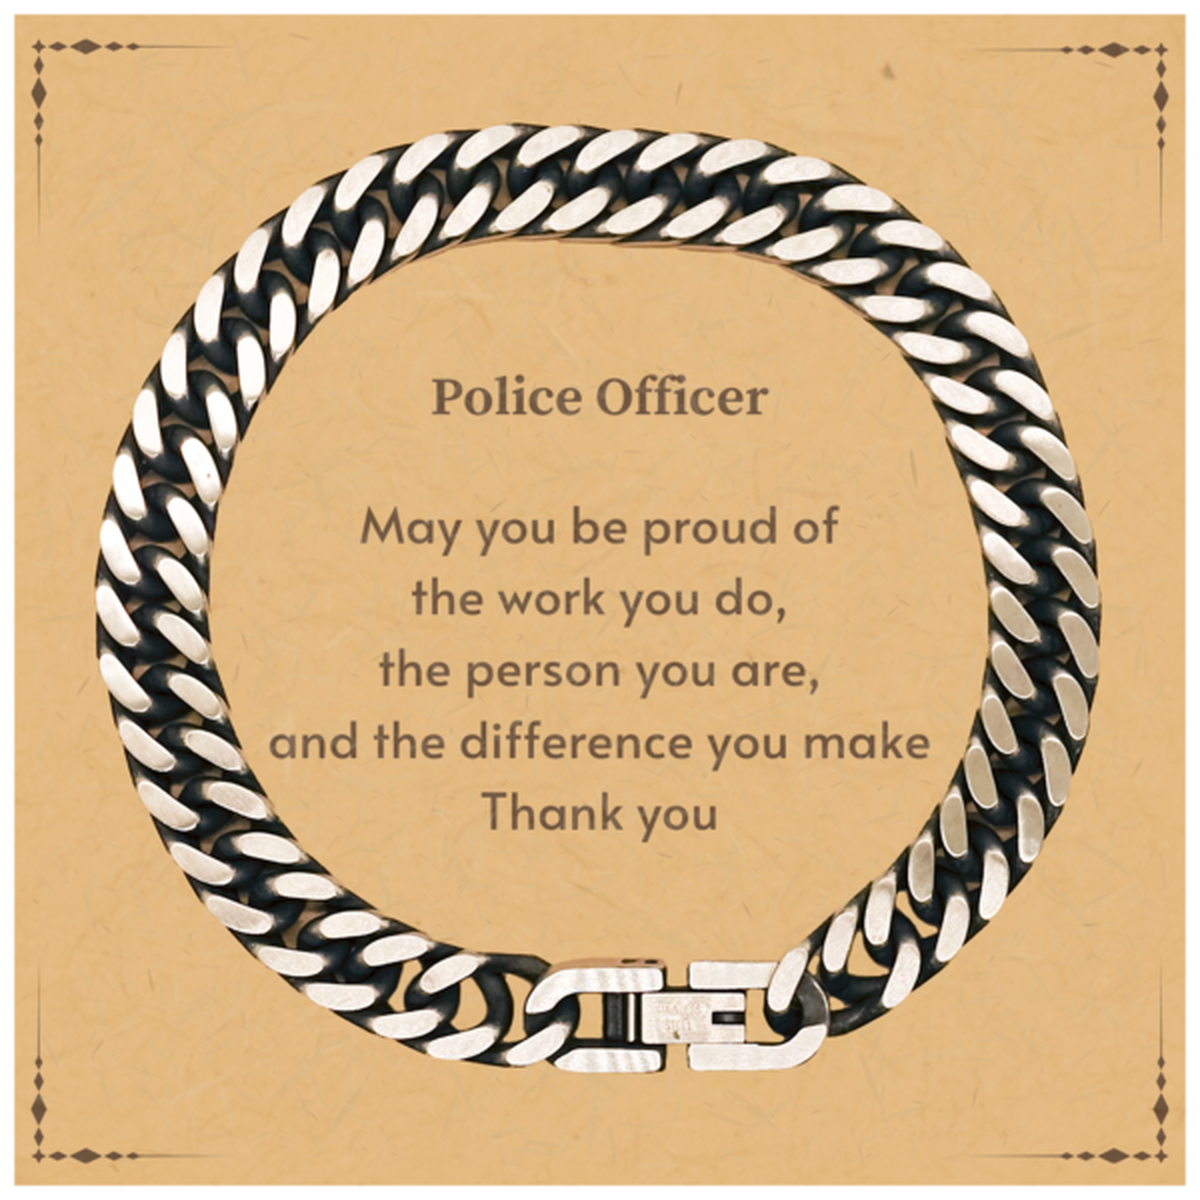 Heartwarming Cuban Link Chain Bracelet Retirement Coworkers Gifts for Police Officer, Police Officer May You be proud of the work you do, the person you are Gifts for Boss Men Women Friends